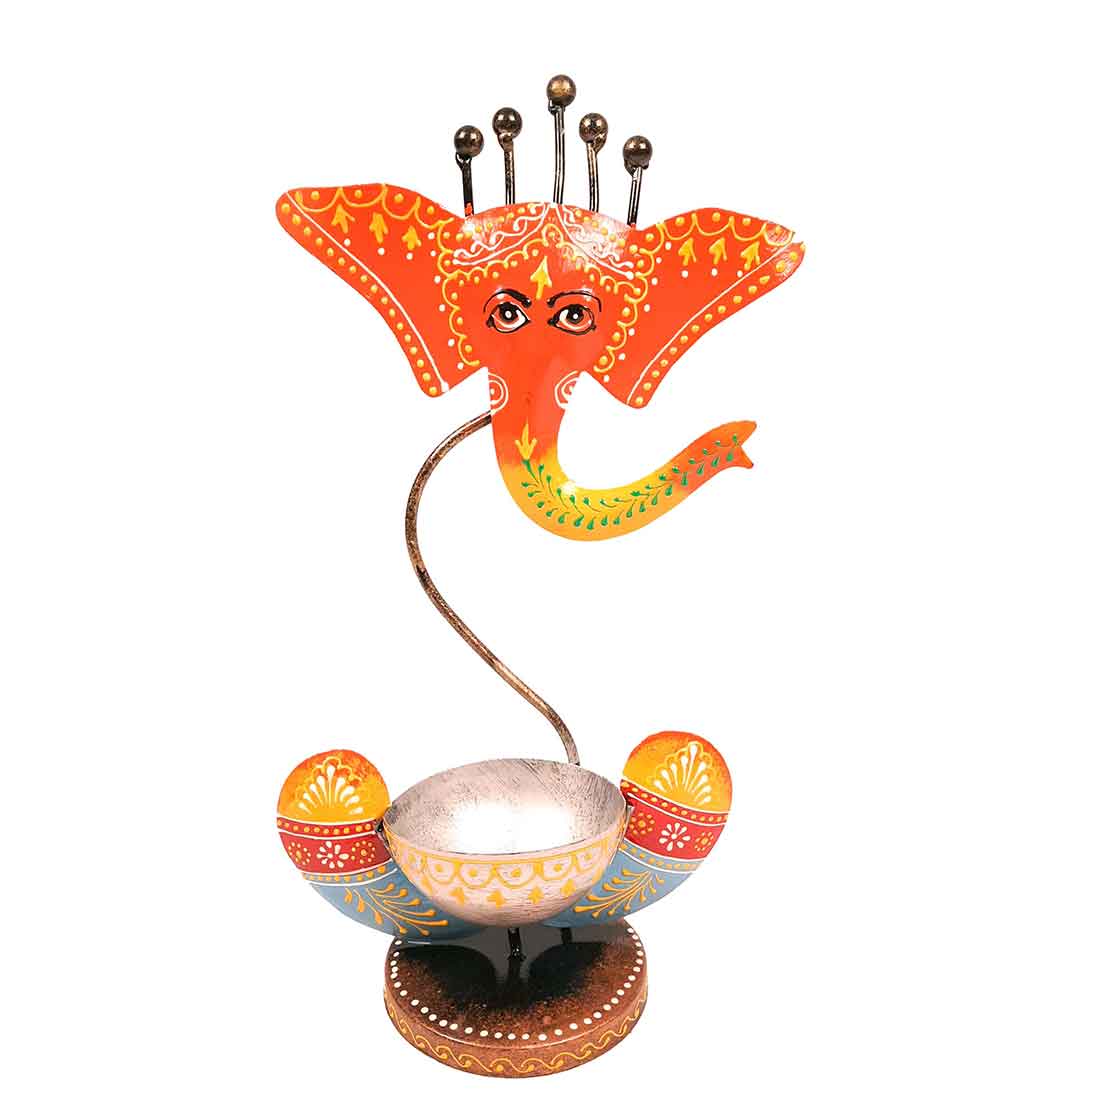 Tea Light Holder Antique | Candle Holders Stand With One Slots | Tea Light Candle Stands - Ganesha Design - For Home, Table, Living Room, Dining room, Bedroom Decor | For Festival Decoration & Gifts -  10 Inch